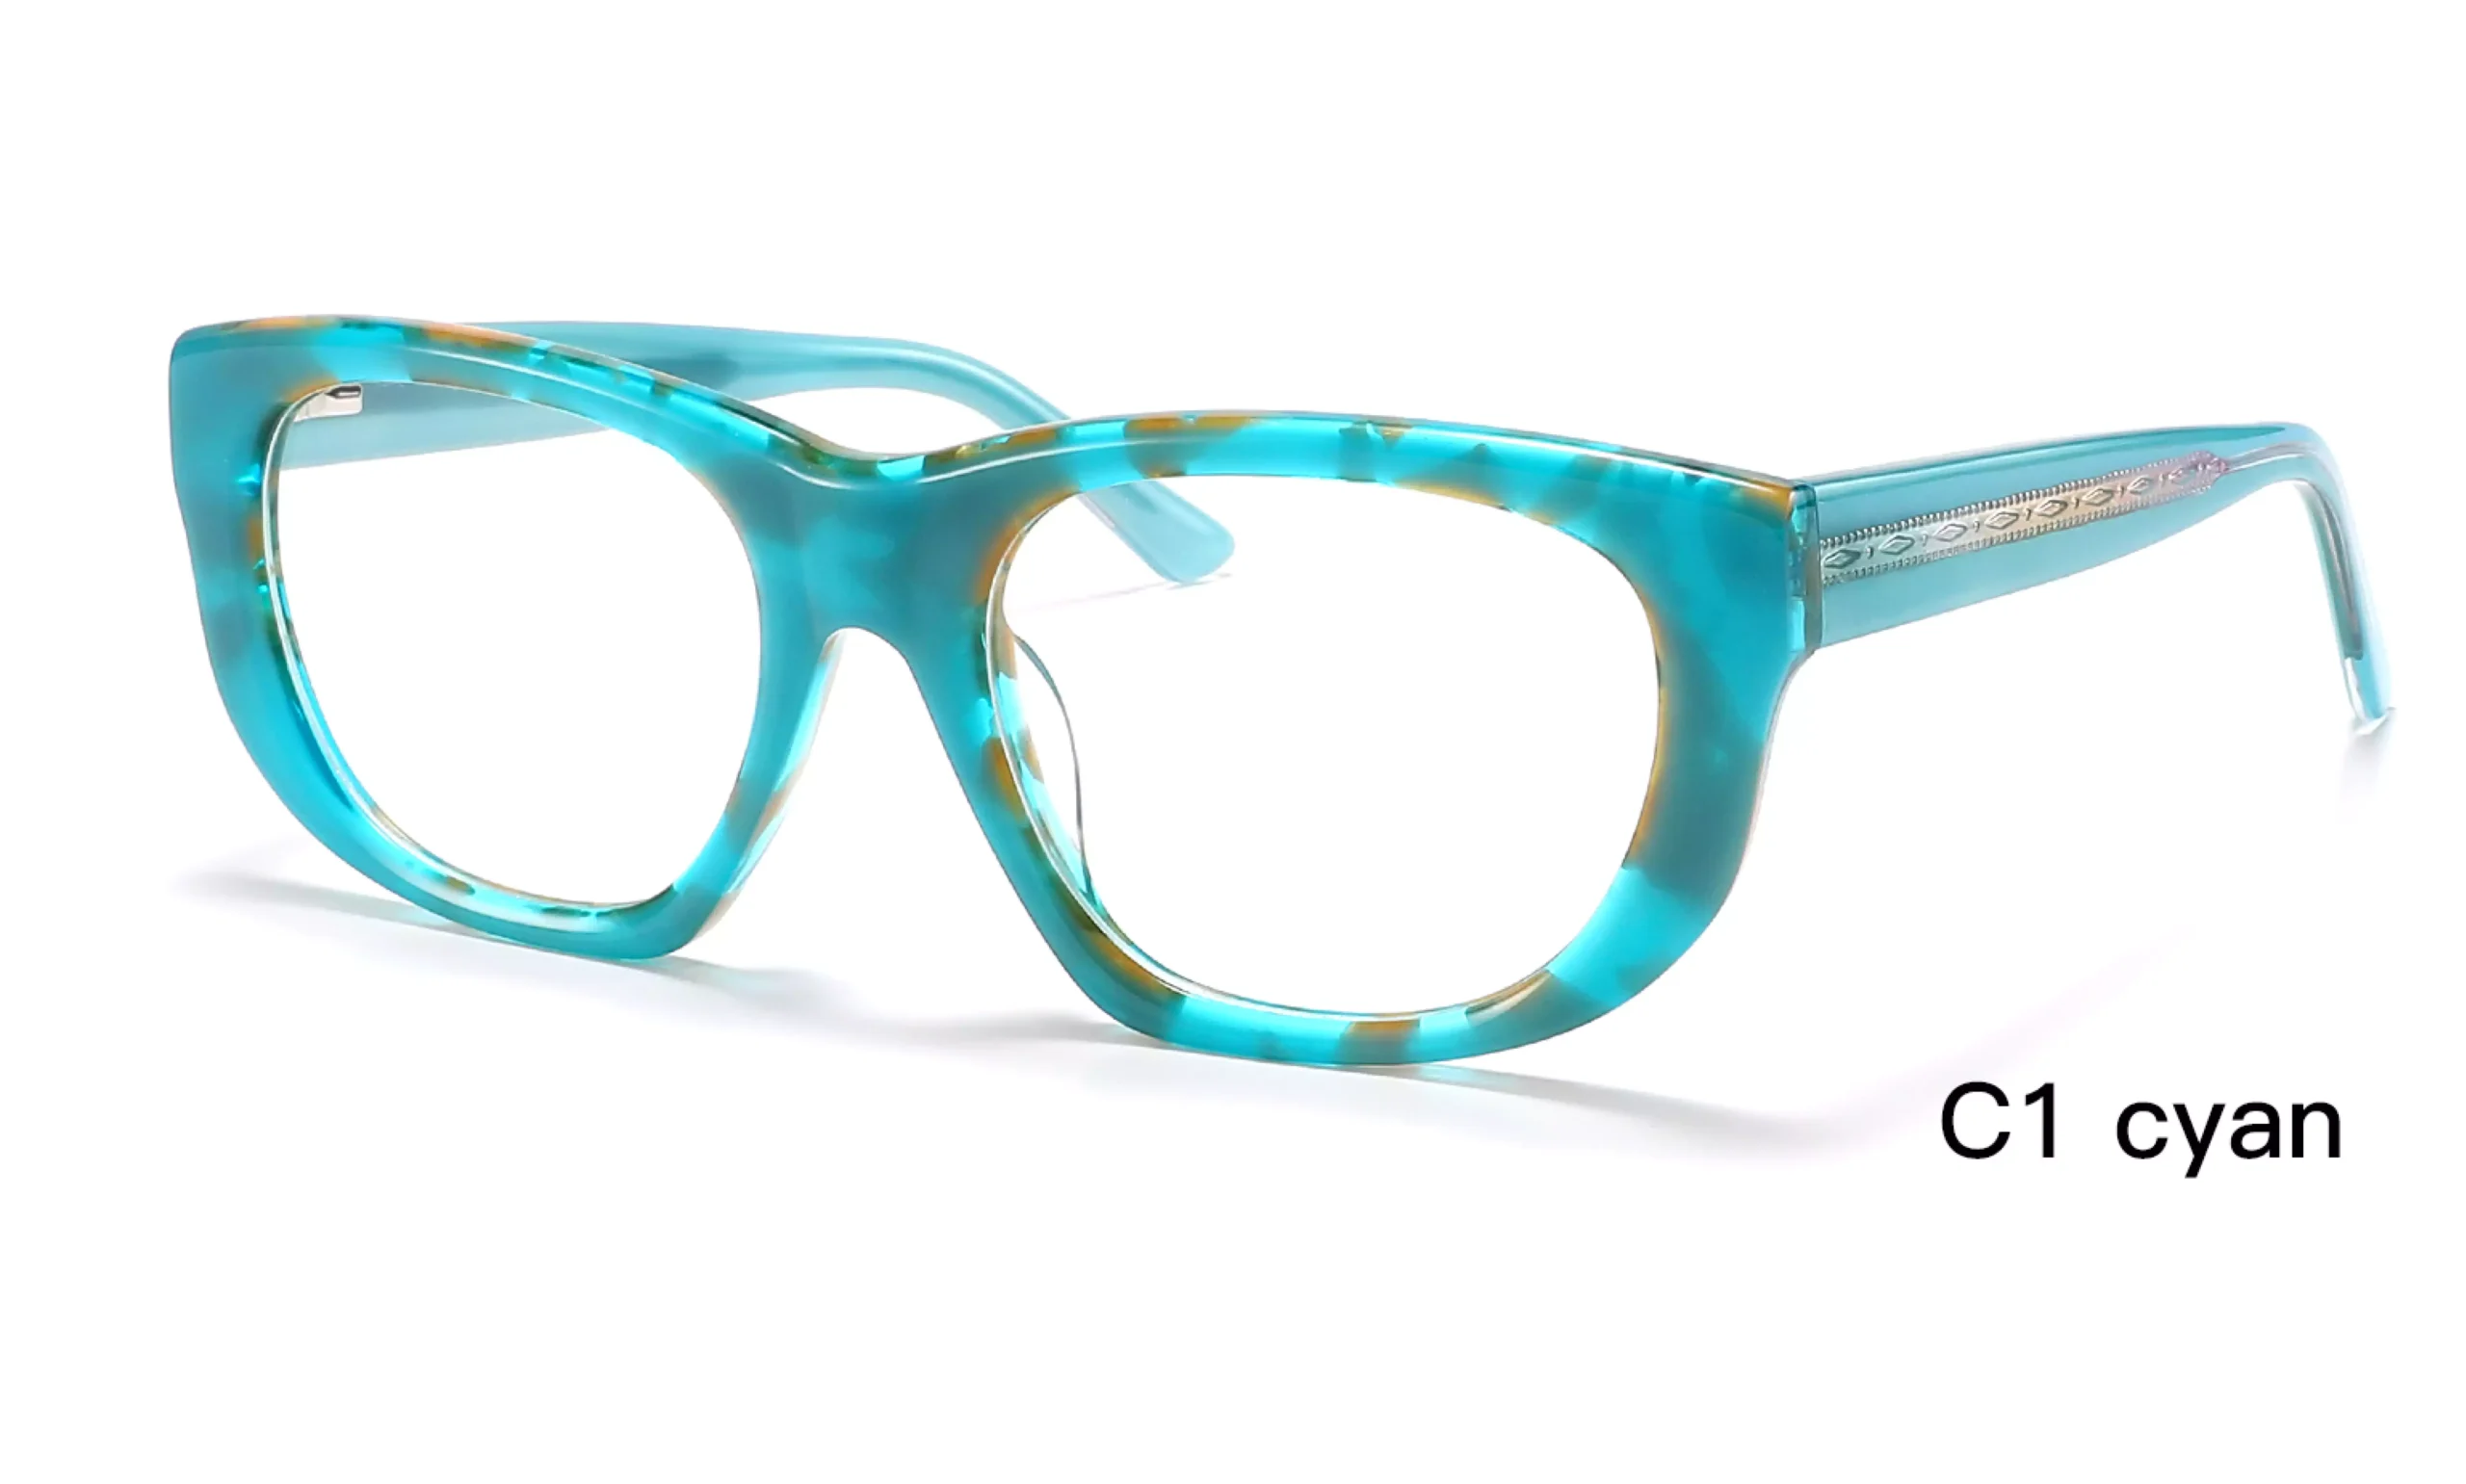 Wholesale, Cyan, Clear stylish, Oval, Eyeglass Frames,45 degree display, laser engraved wire core, gradient, diamond patterns